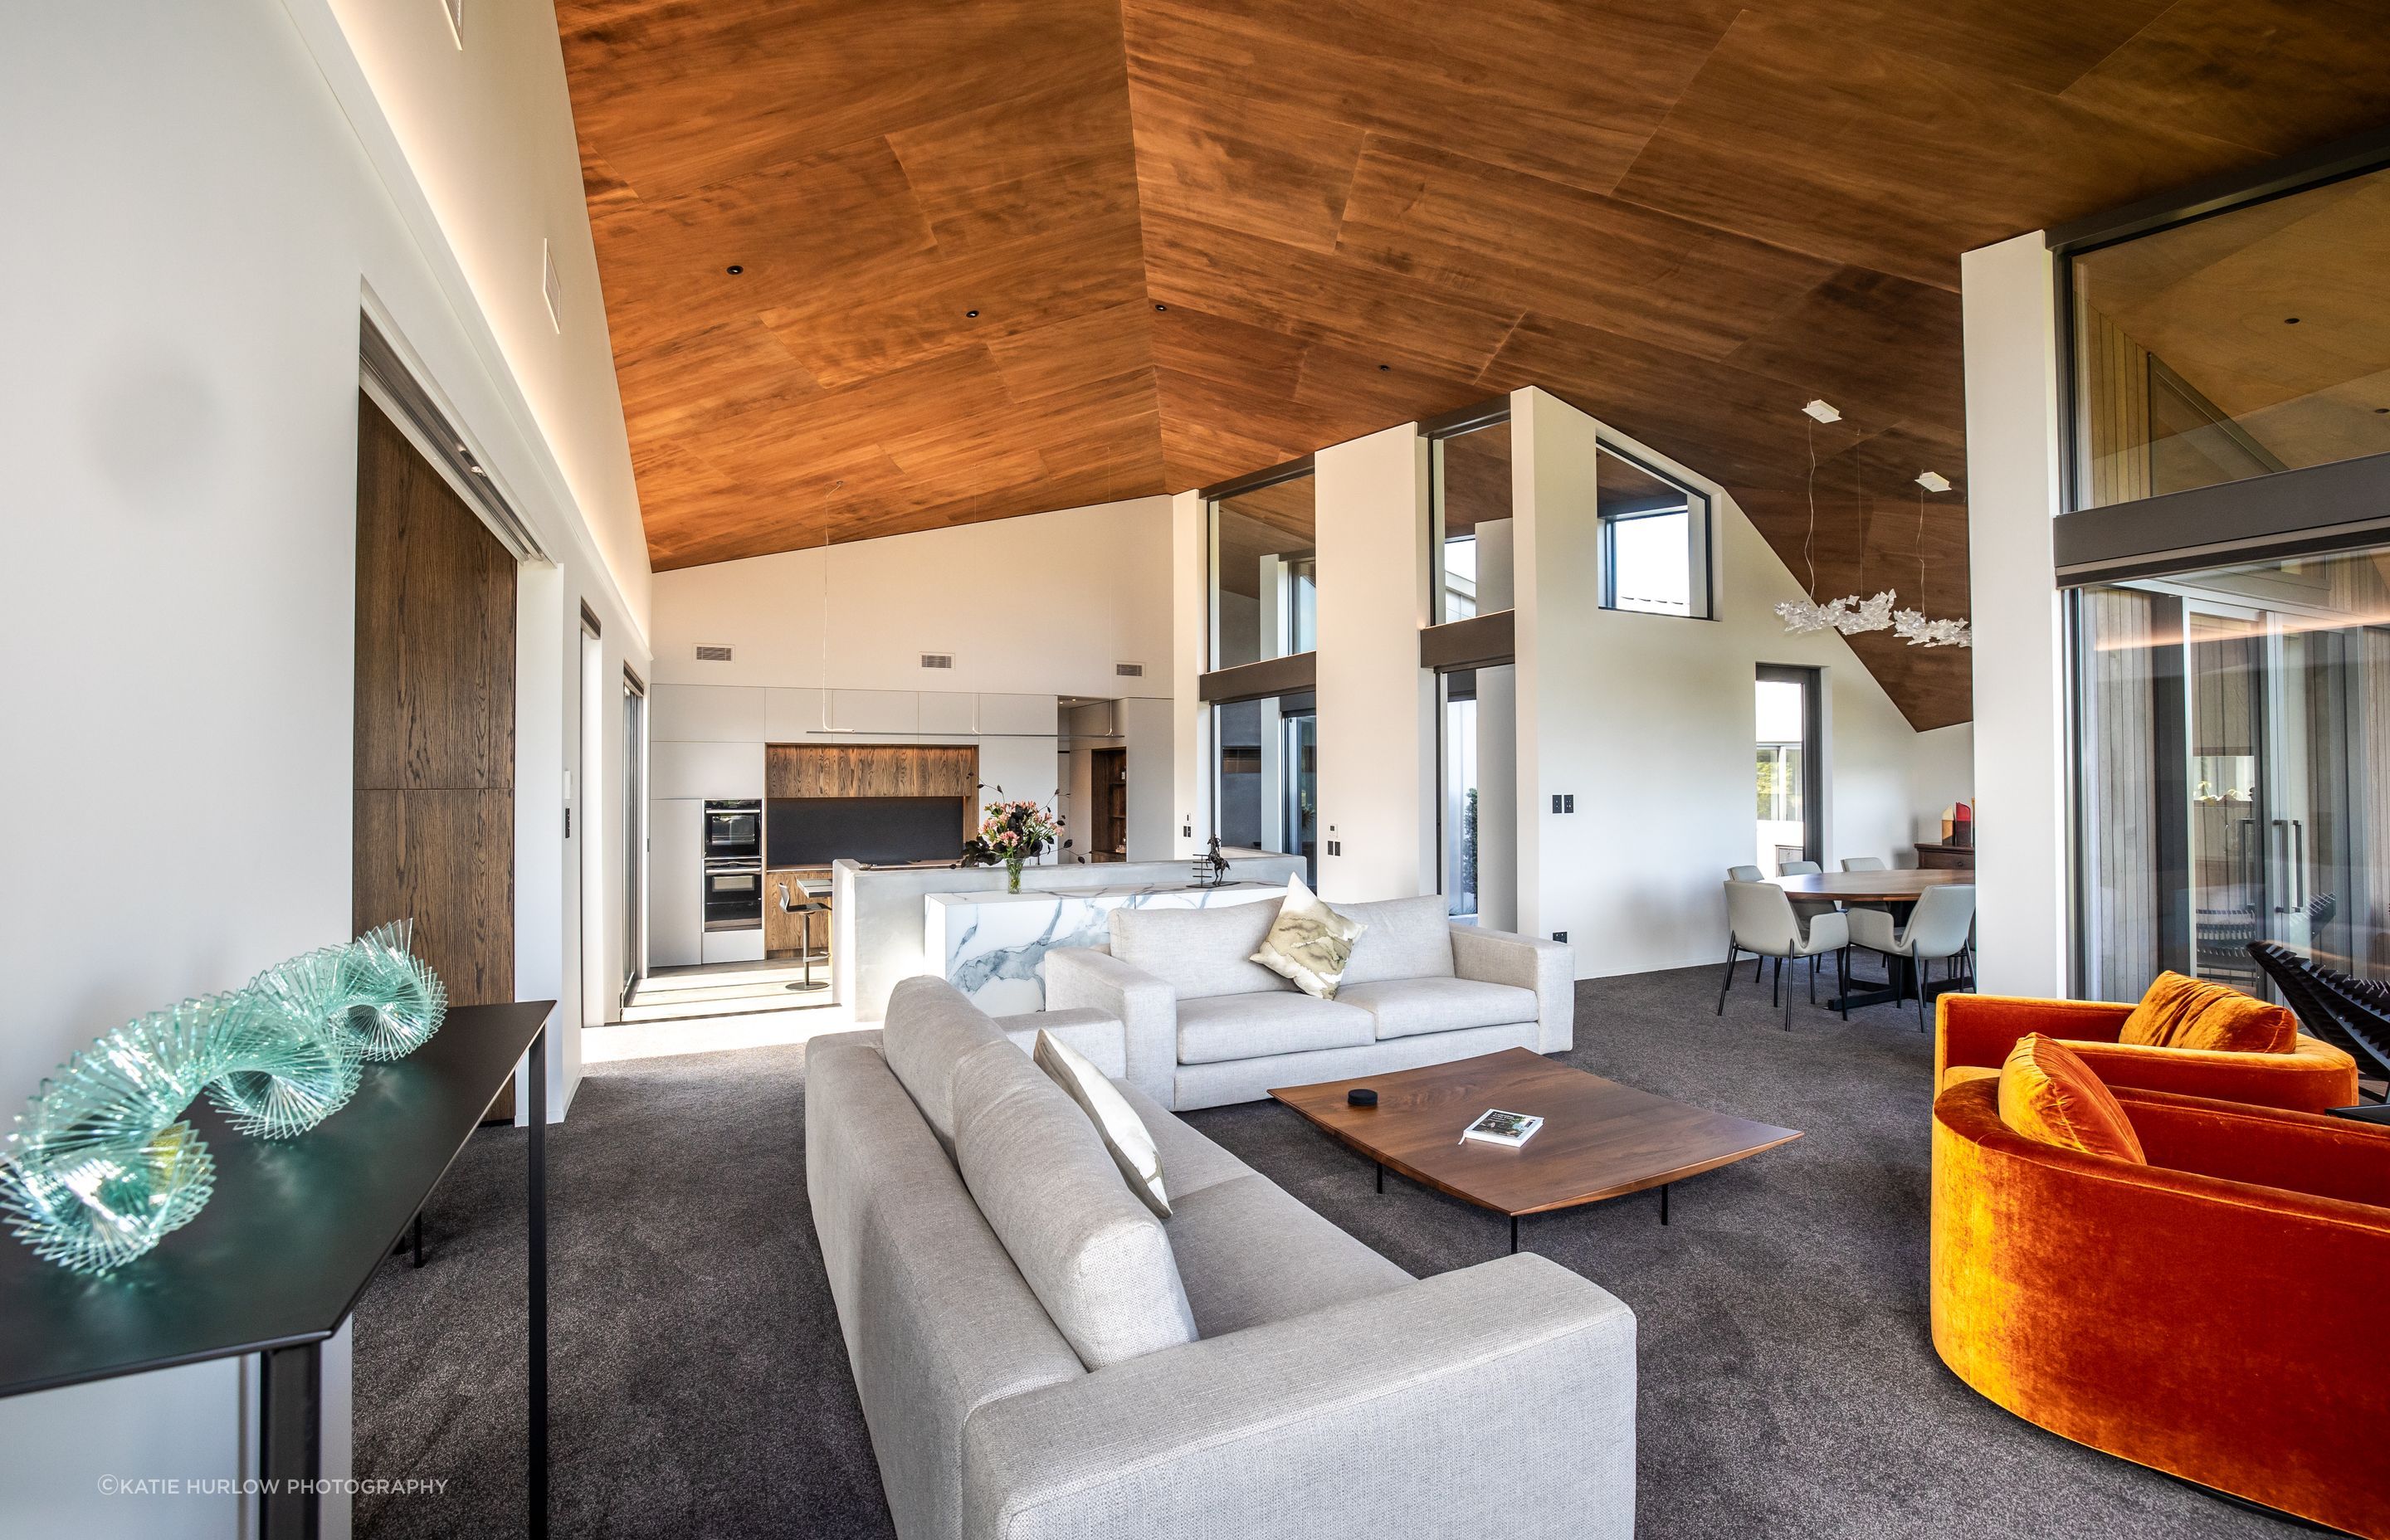 The shape of the interior is dictated by the form of the home, which opens up to the view and closes down towards the road frontage; the stunning timber ply lined ceiling accentuates the dynamic, sculptural form of the home.